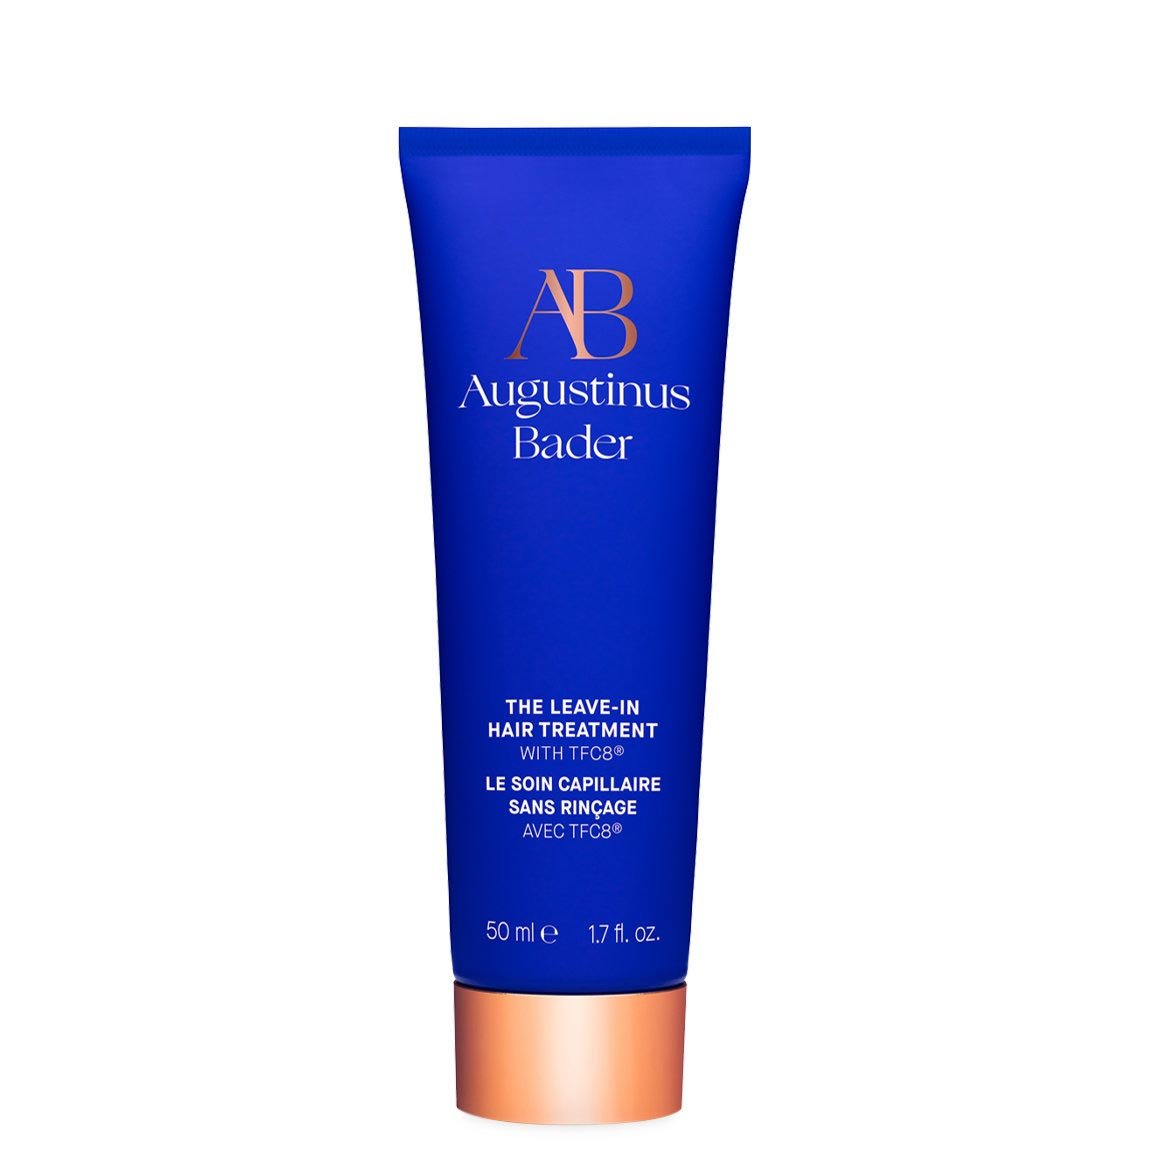 Shop Augustinus Bader's The Leave In Treatment on Beautylish.com